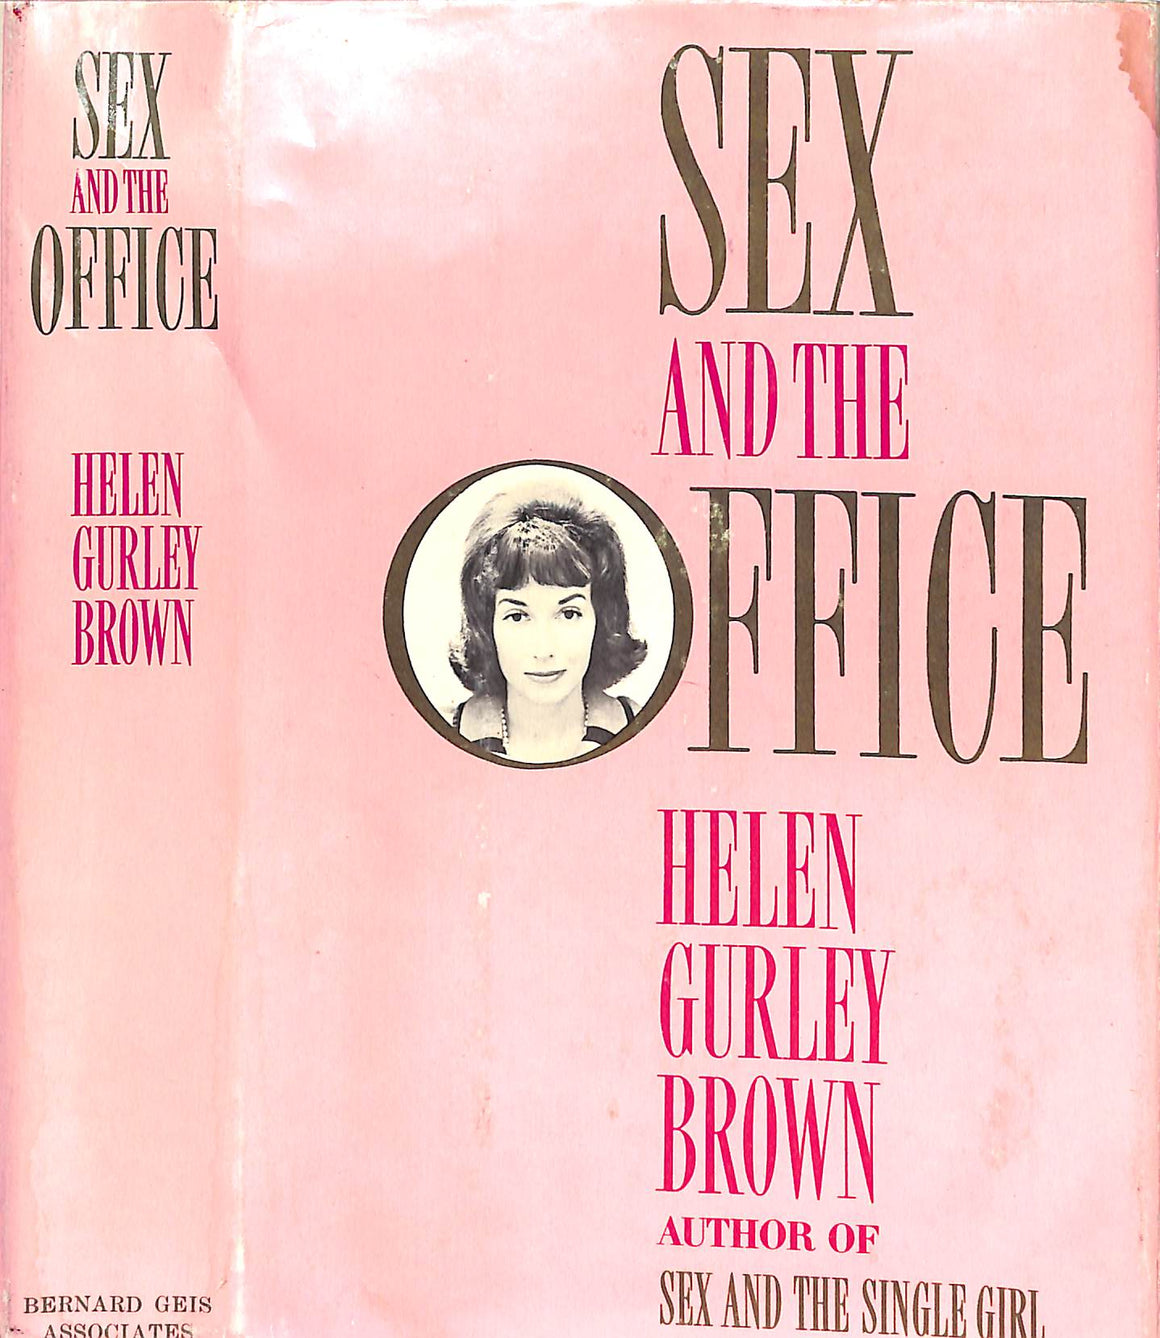 "Sex And The Office" 1964 BROWN, Helen Gurley (INSCRIBED)